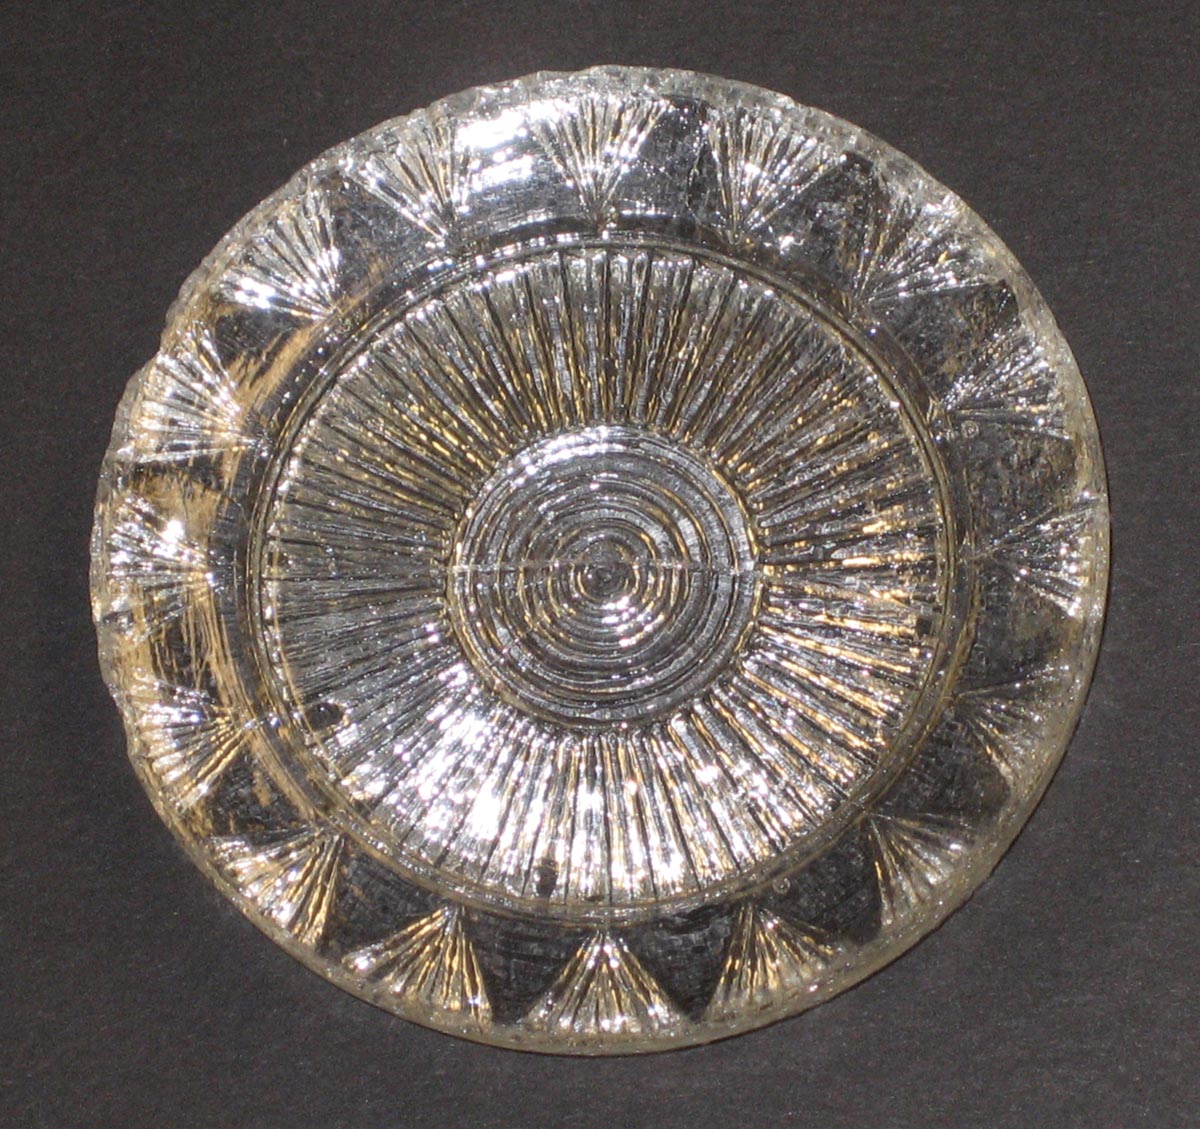 2003.0041.032 Rosette-pattern cup plate